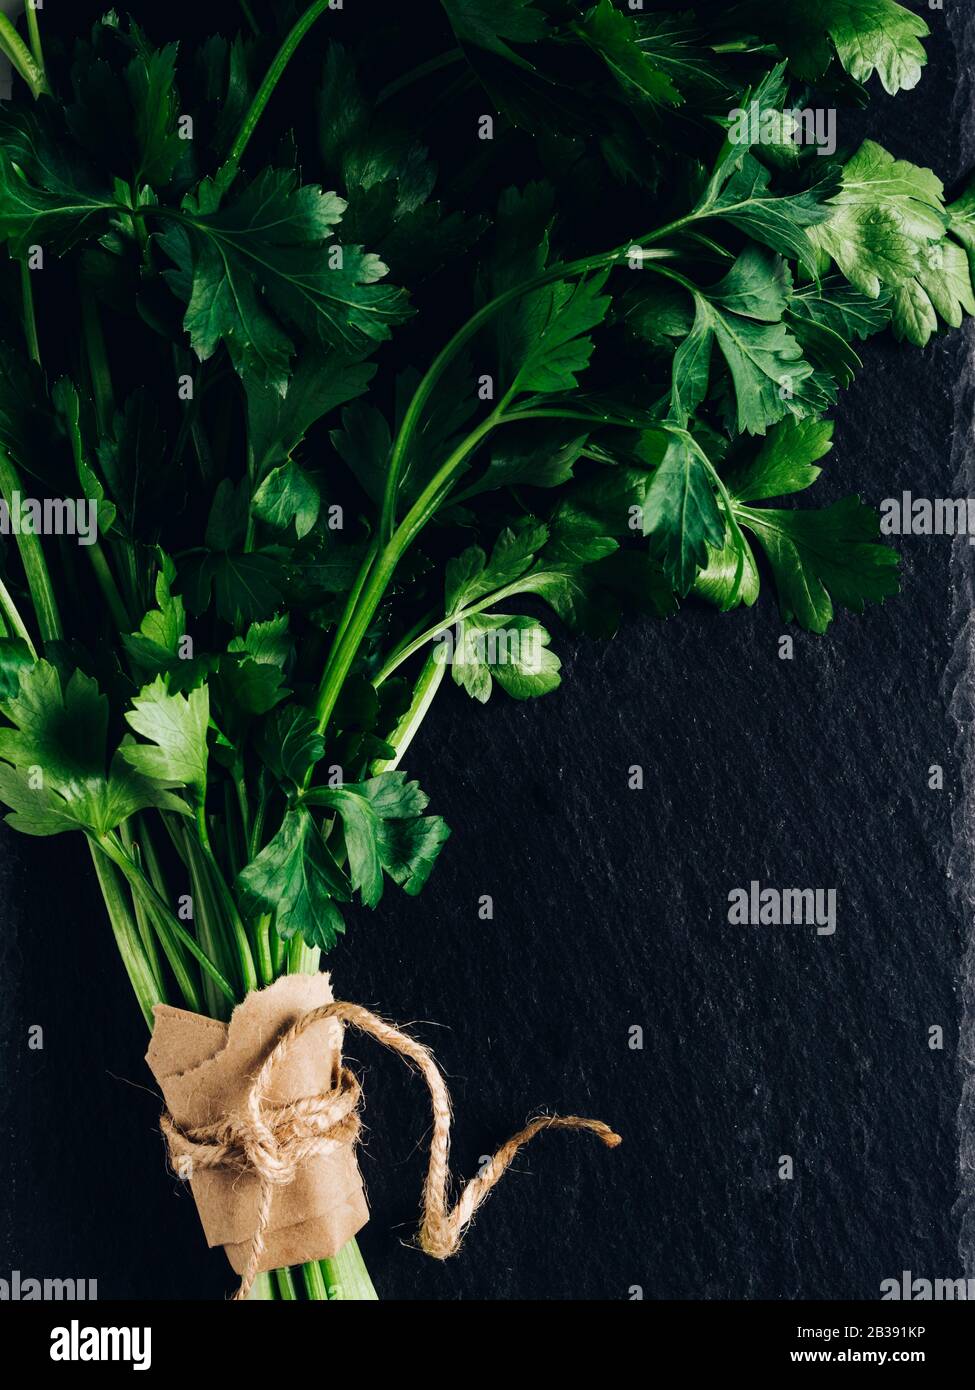 freshness parsley . Bunch of parsley, green organic herb. Vegetable ingredient for healthy tasty food Stock Photo